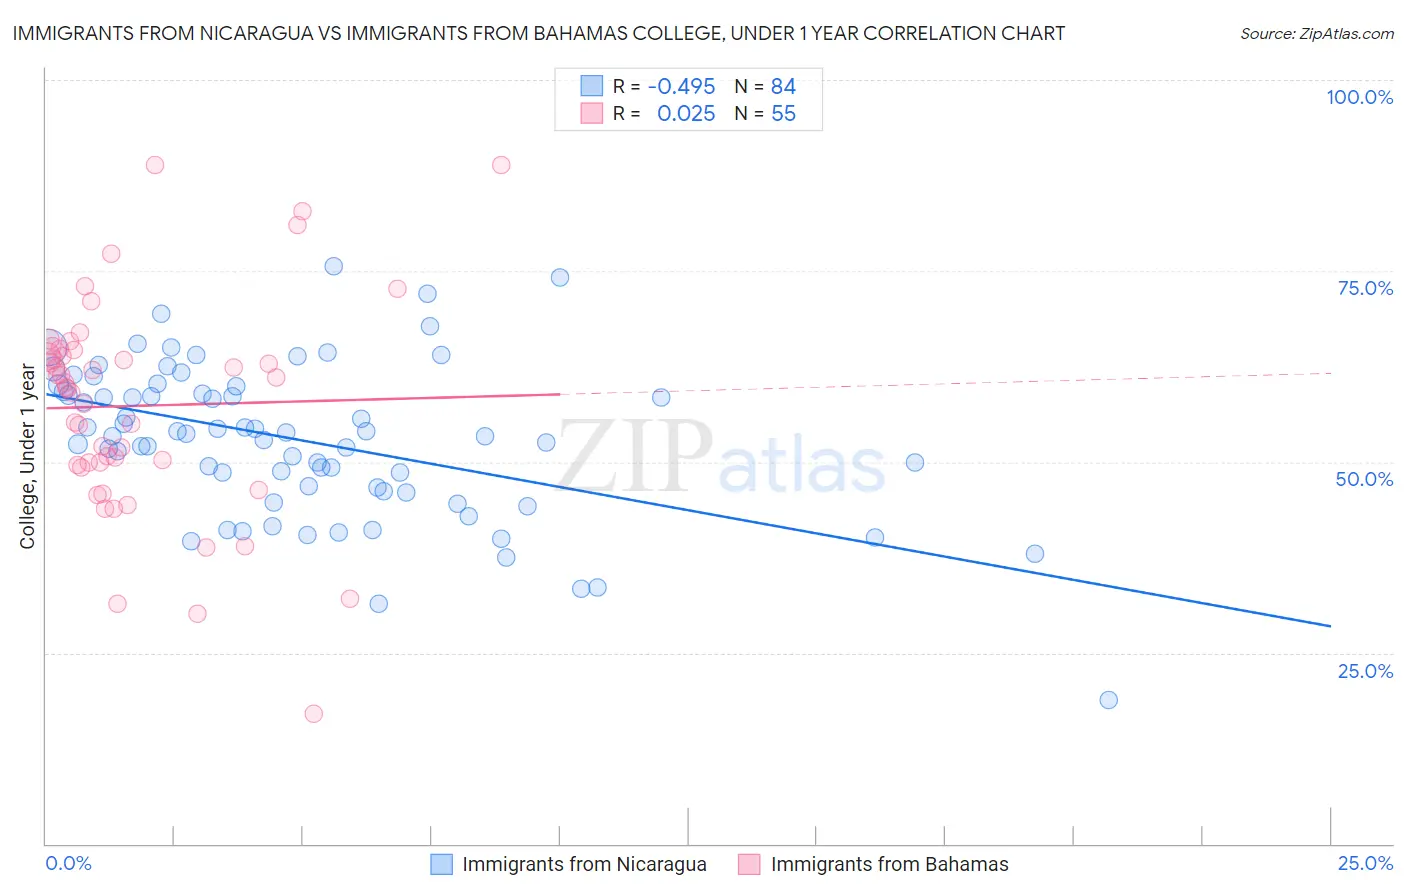 Immigrants from Nicaragua vs Immigrants from Bahamas College, Under 1 year